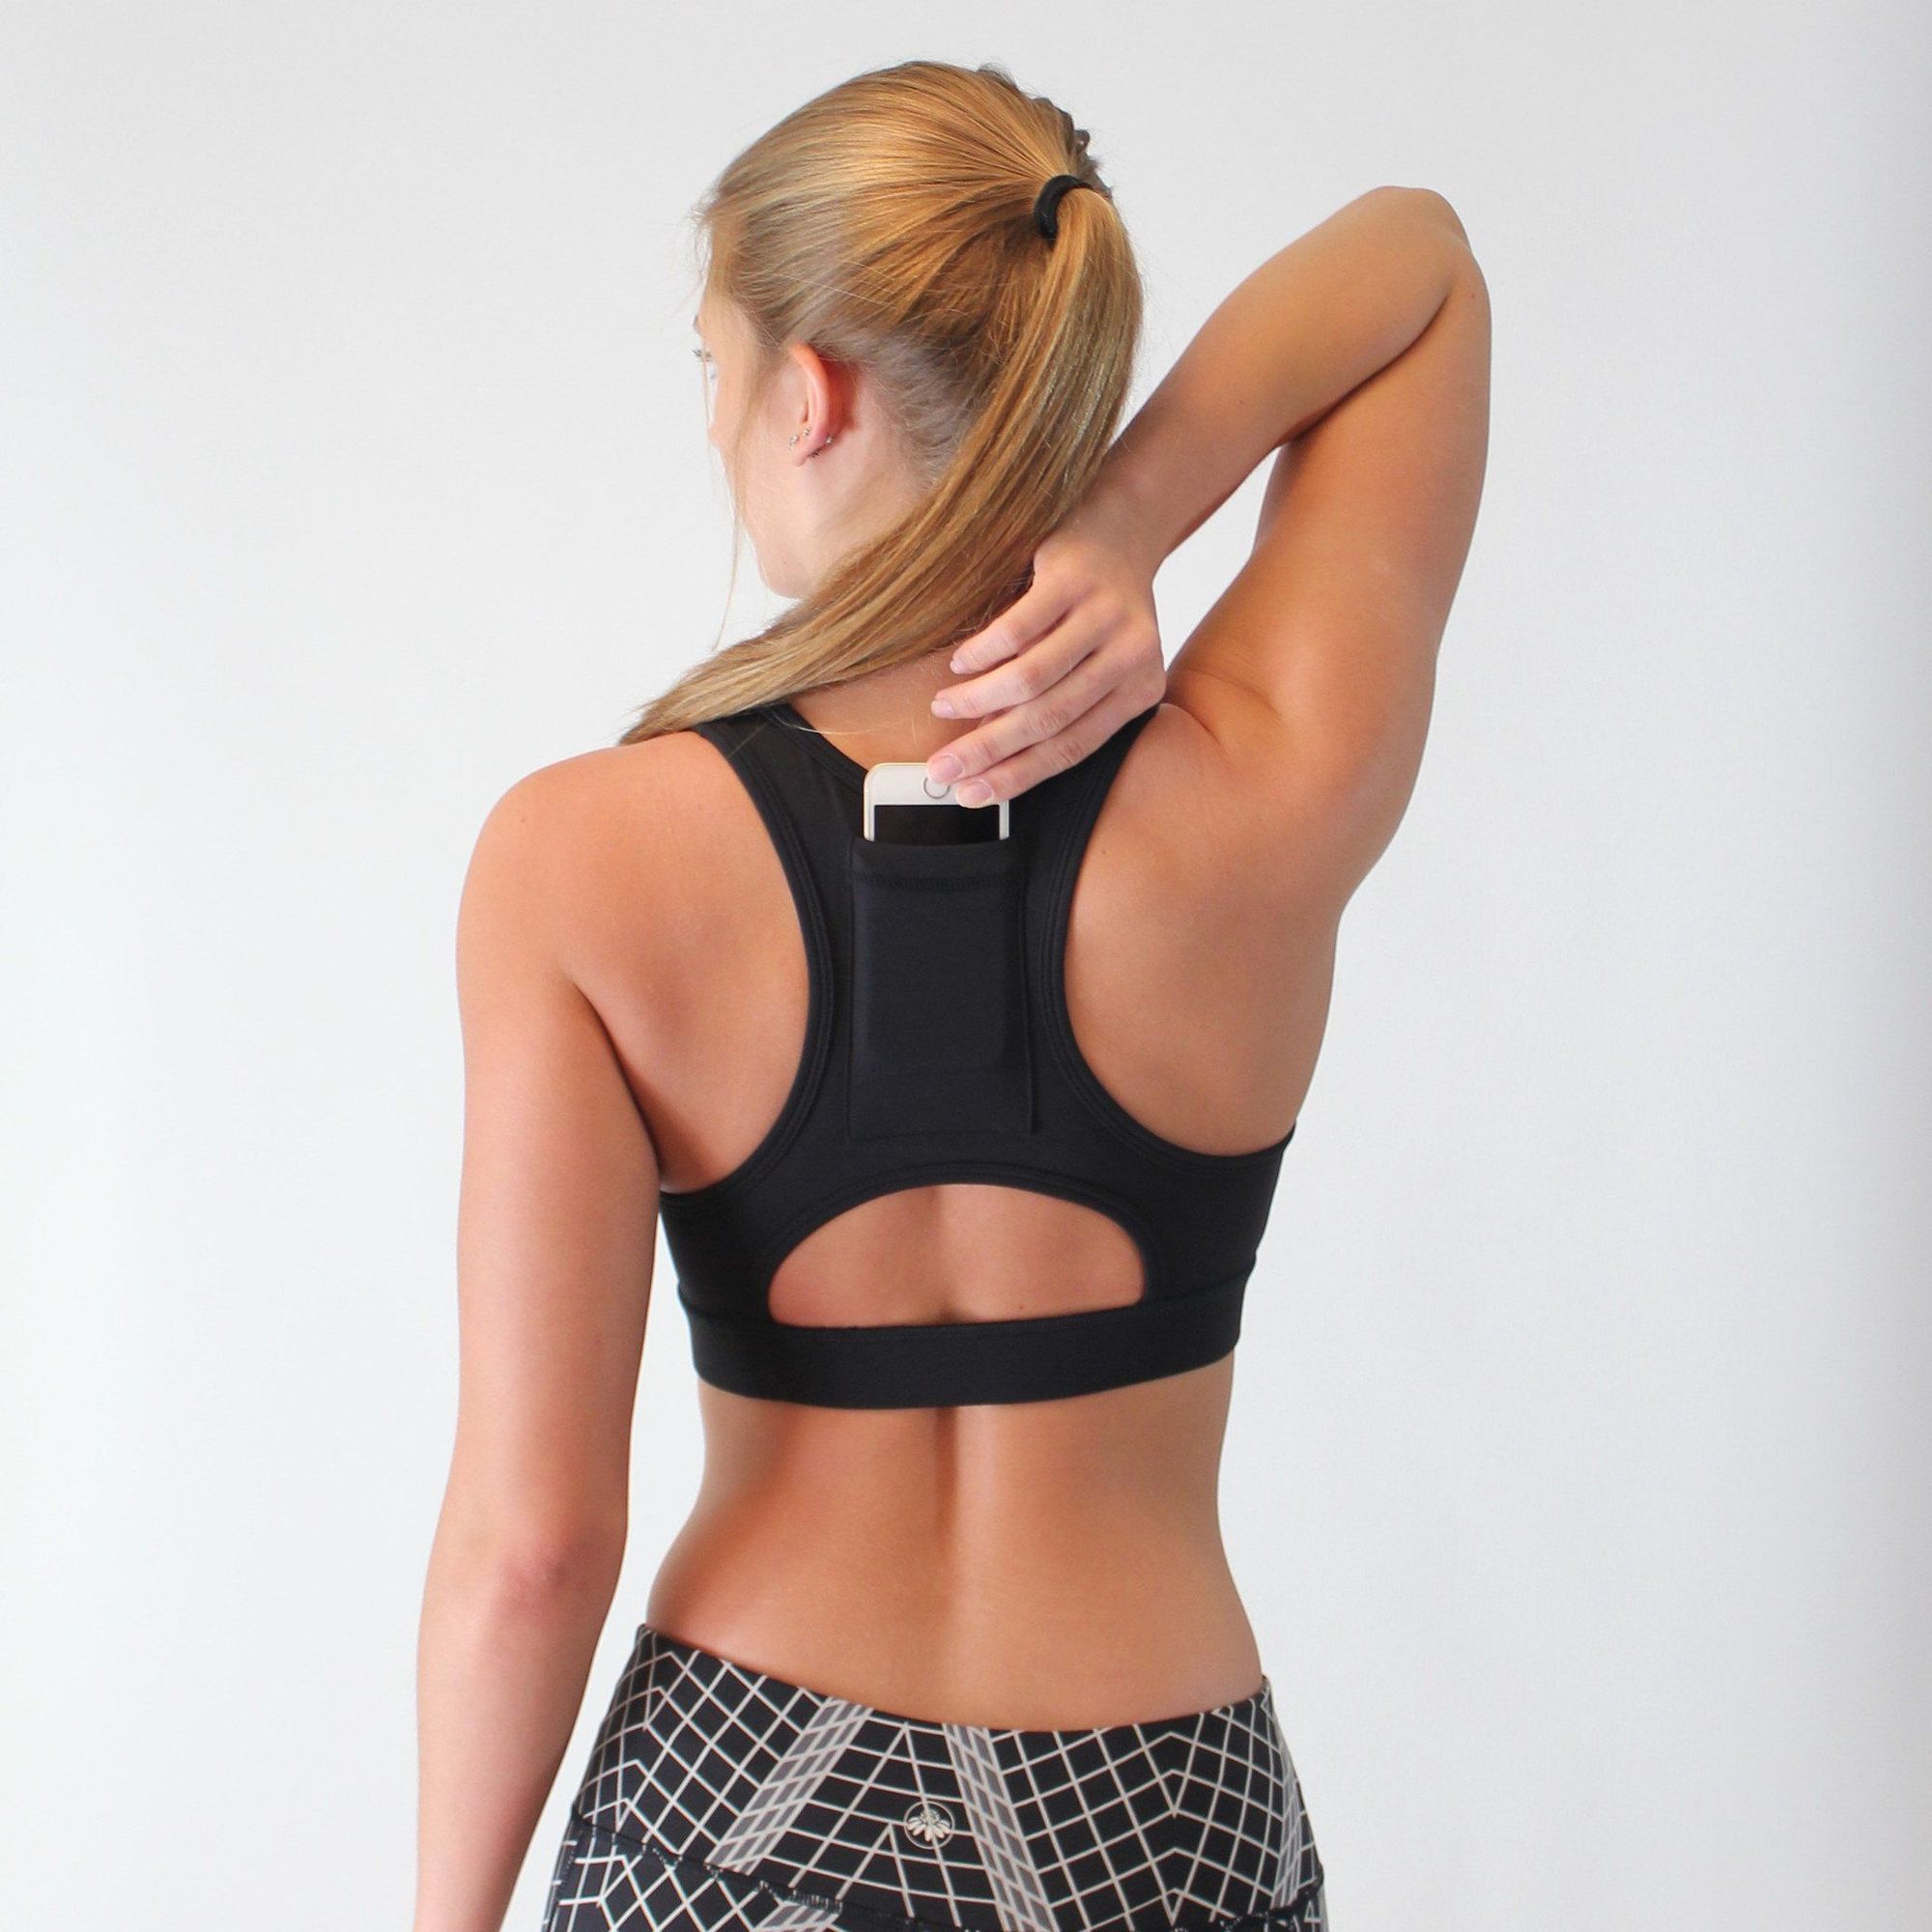 This Sports Bra With A hidden pocket will hold your phone, keys